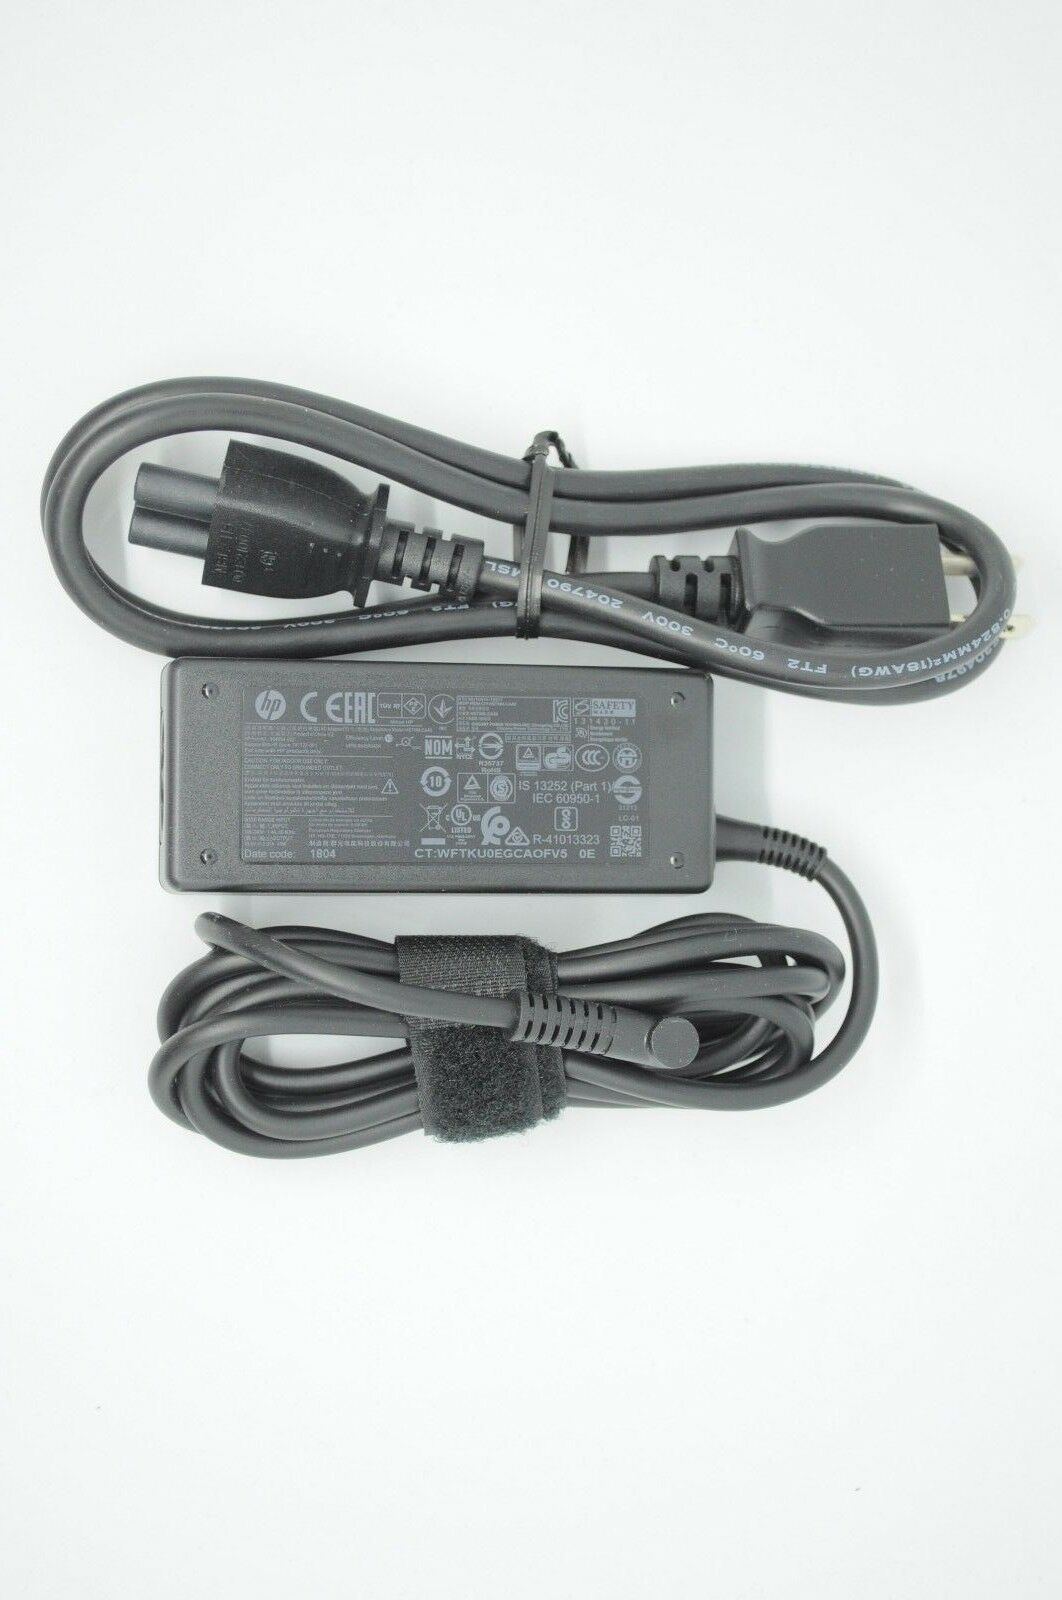 New Genuine OEM Power Charger Adapter for HP LAPTOP 15-AY111CY, 15-AY112CY Col